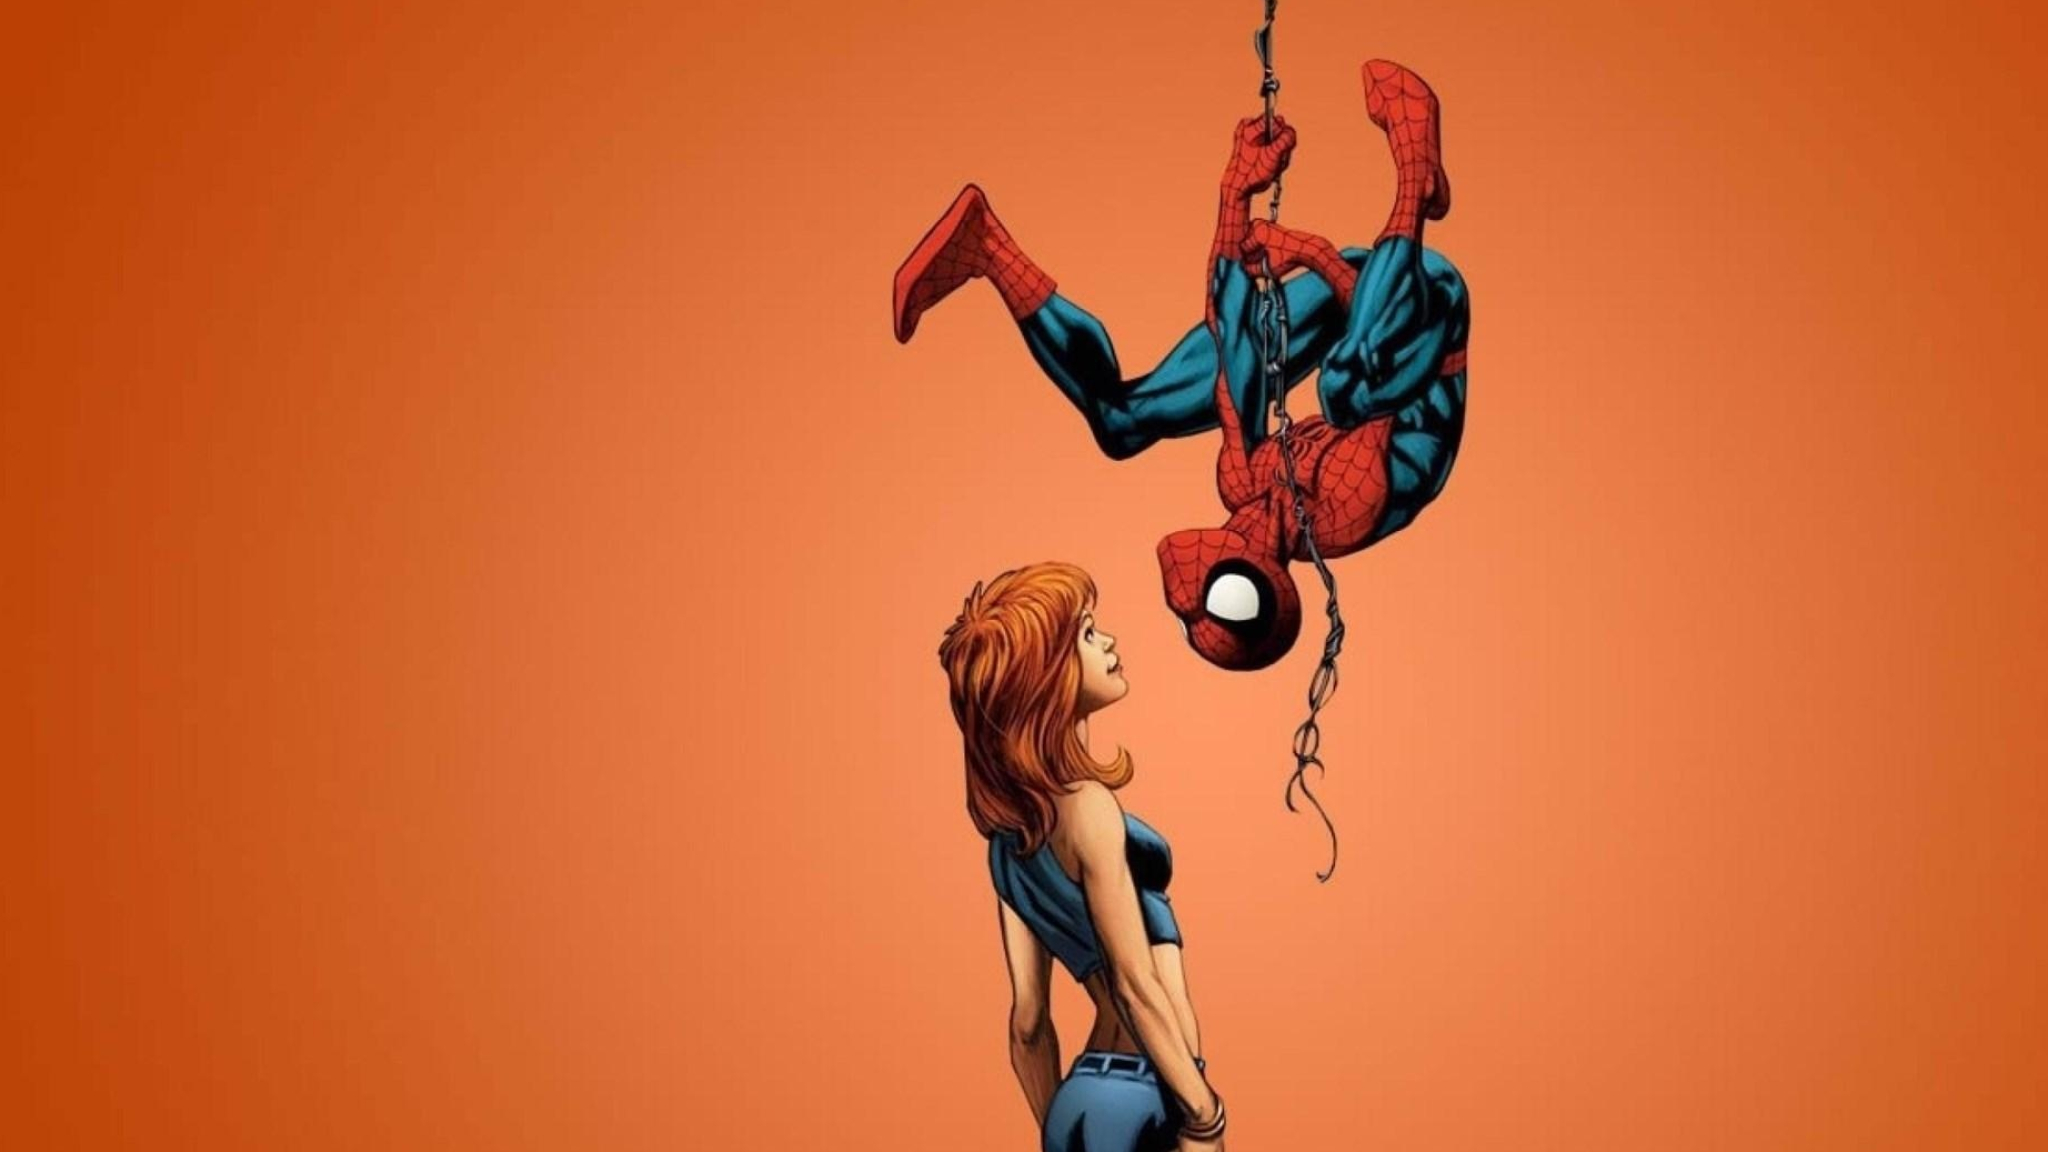 Spiderman Mary Jane, HQ wallpapers, Free download, High-quality images, 2050x1160 HD Desktop